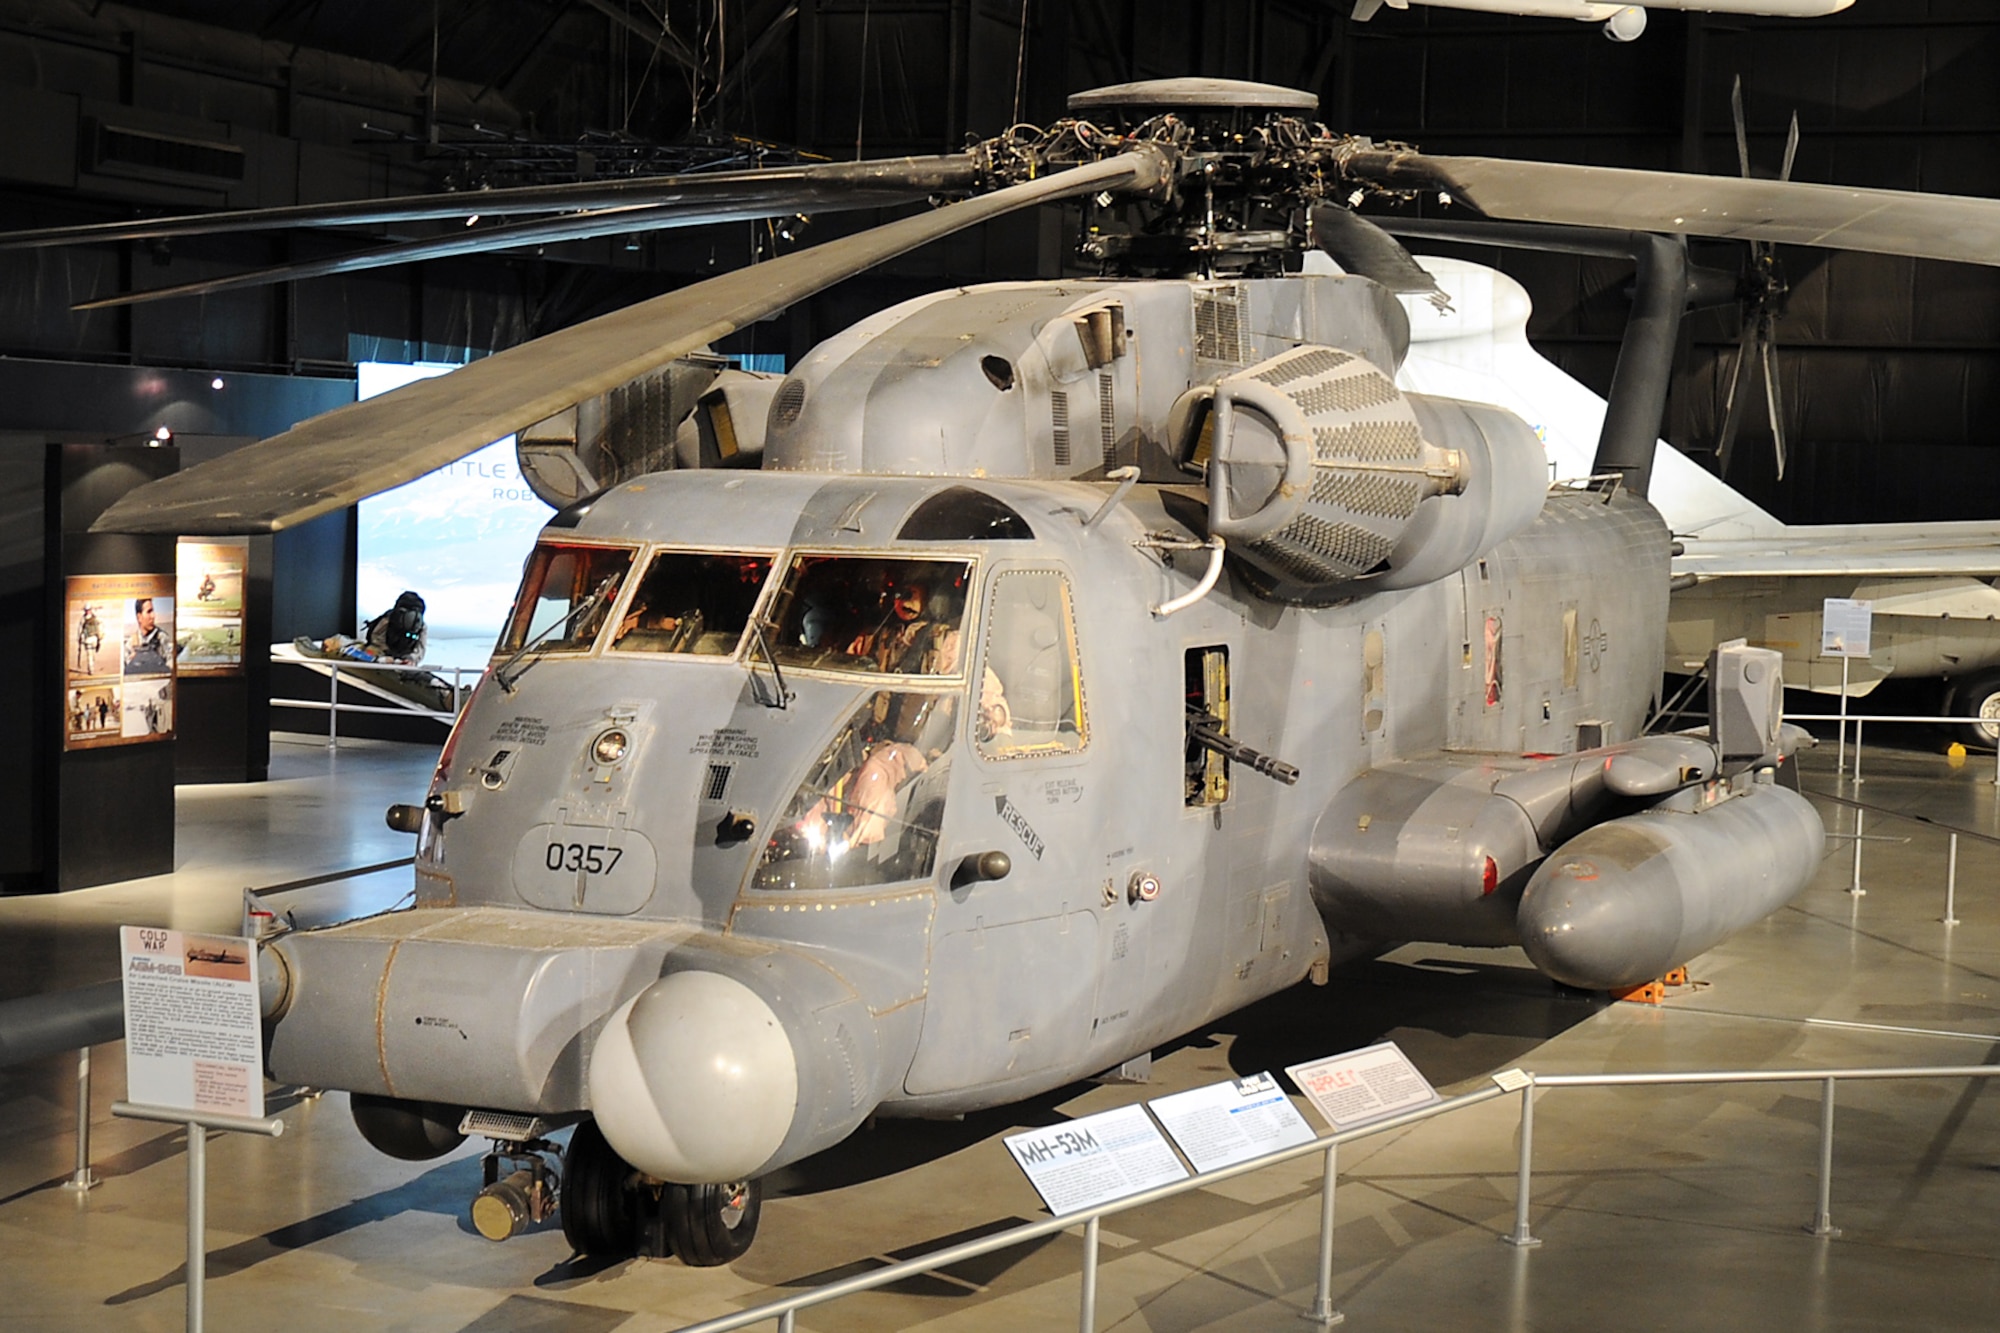 DAYTON, Ohio - Sikorsky MH-53M Pave Low IV on display in the Cold War Gallery at the National Museum of the U.S. Air Force. (U.S. Air Force photo)
